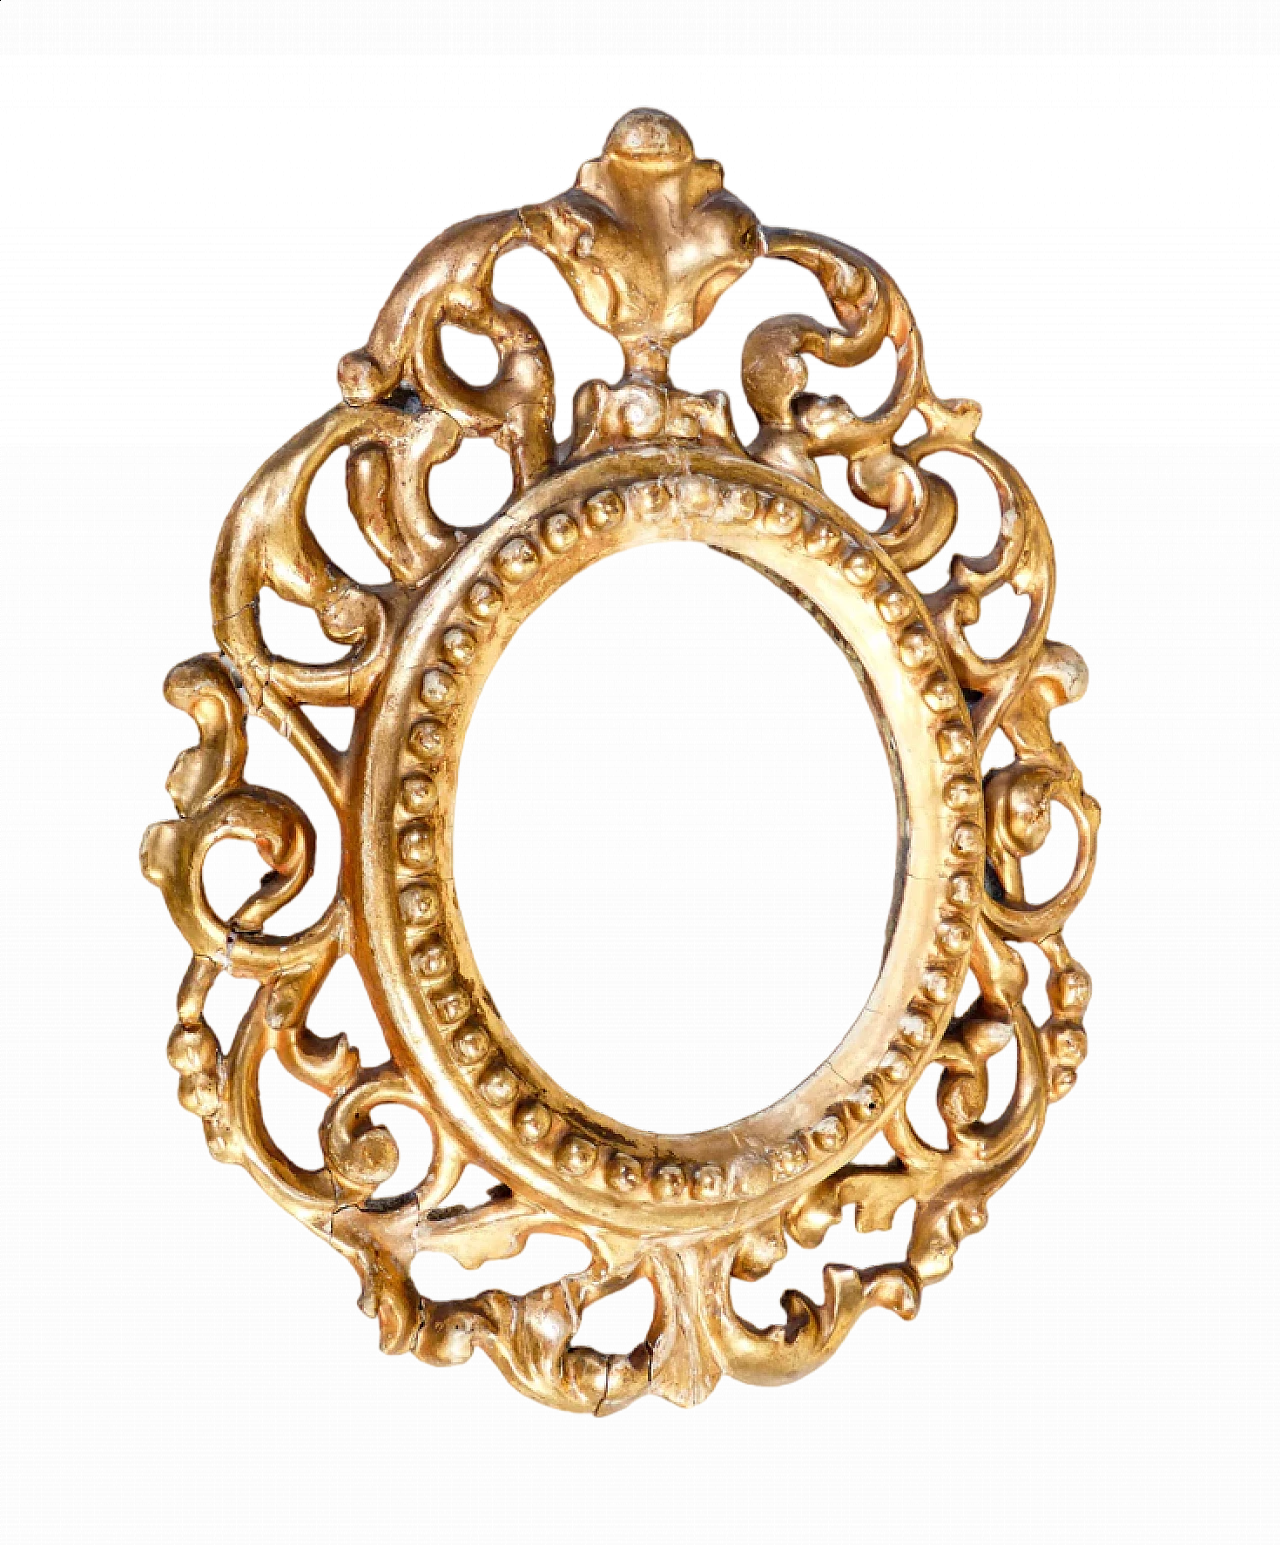 Carved wooden mirror gilded with gold leaf, 18th century 8